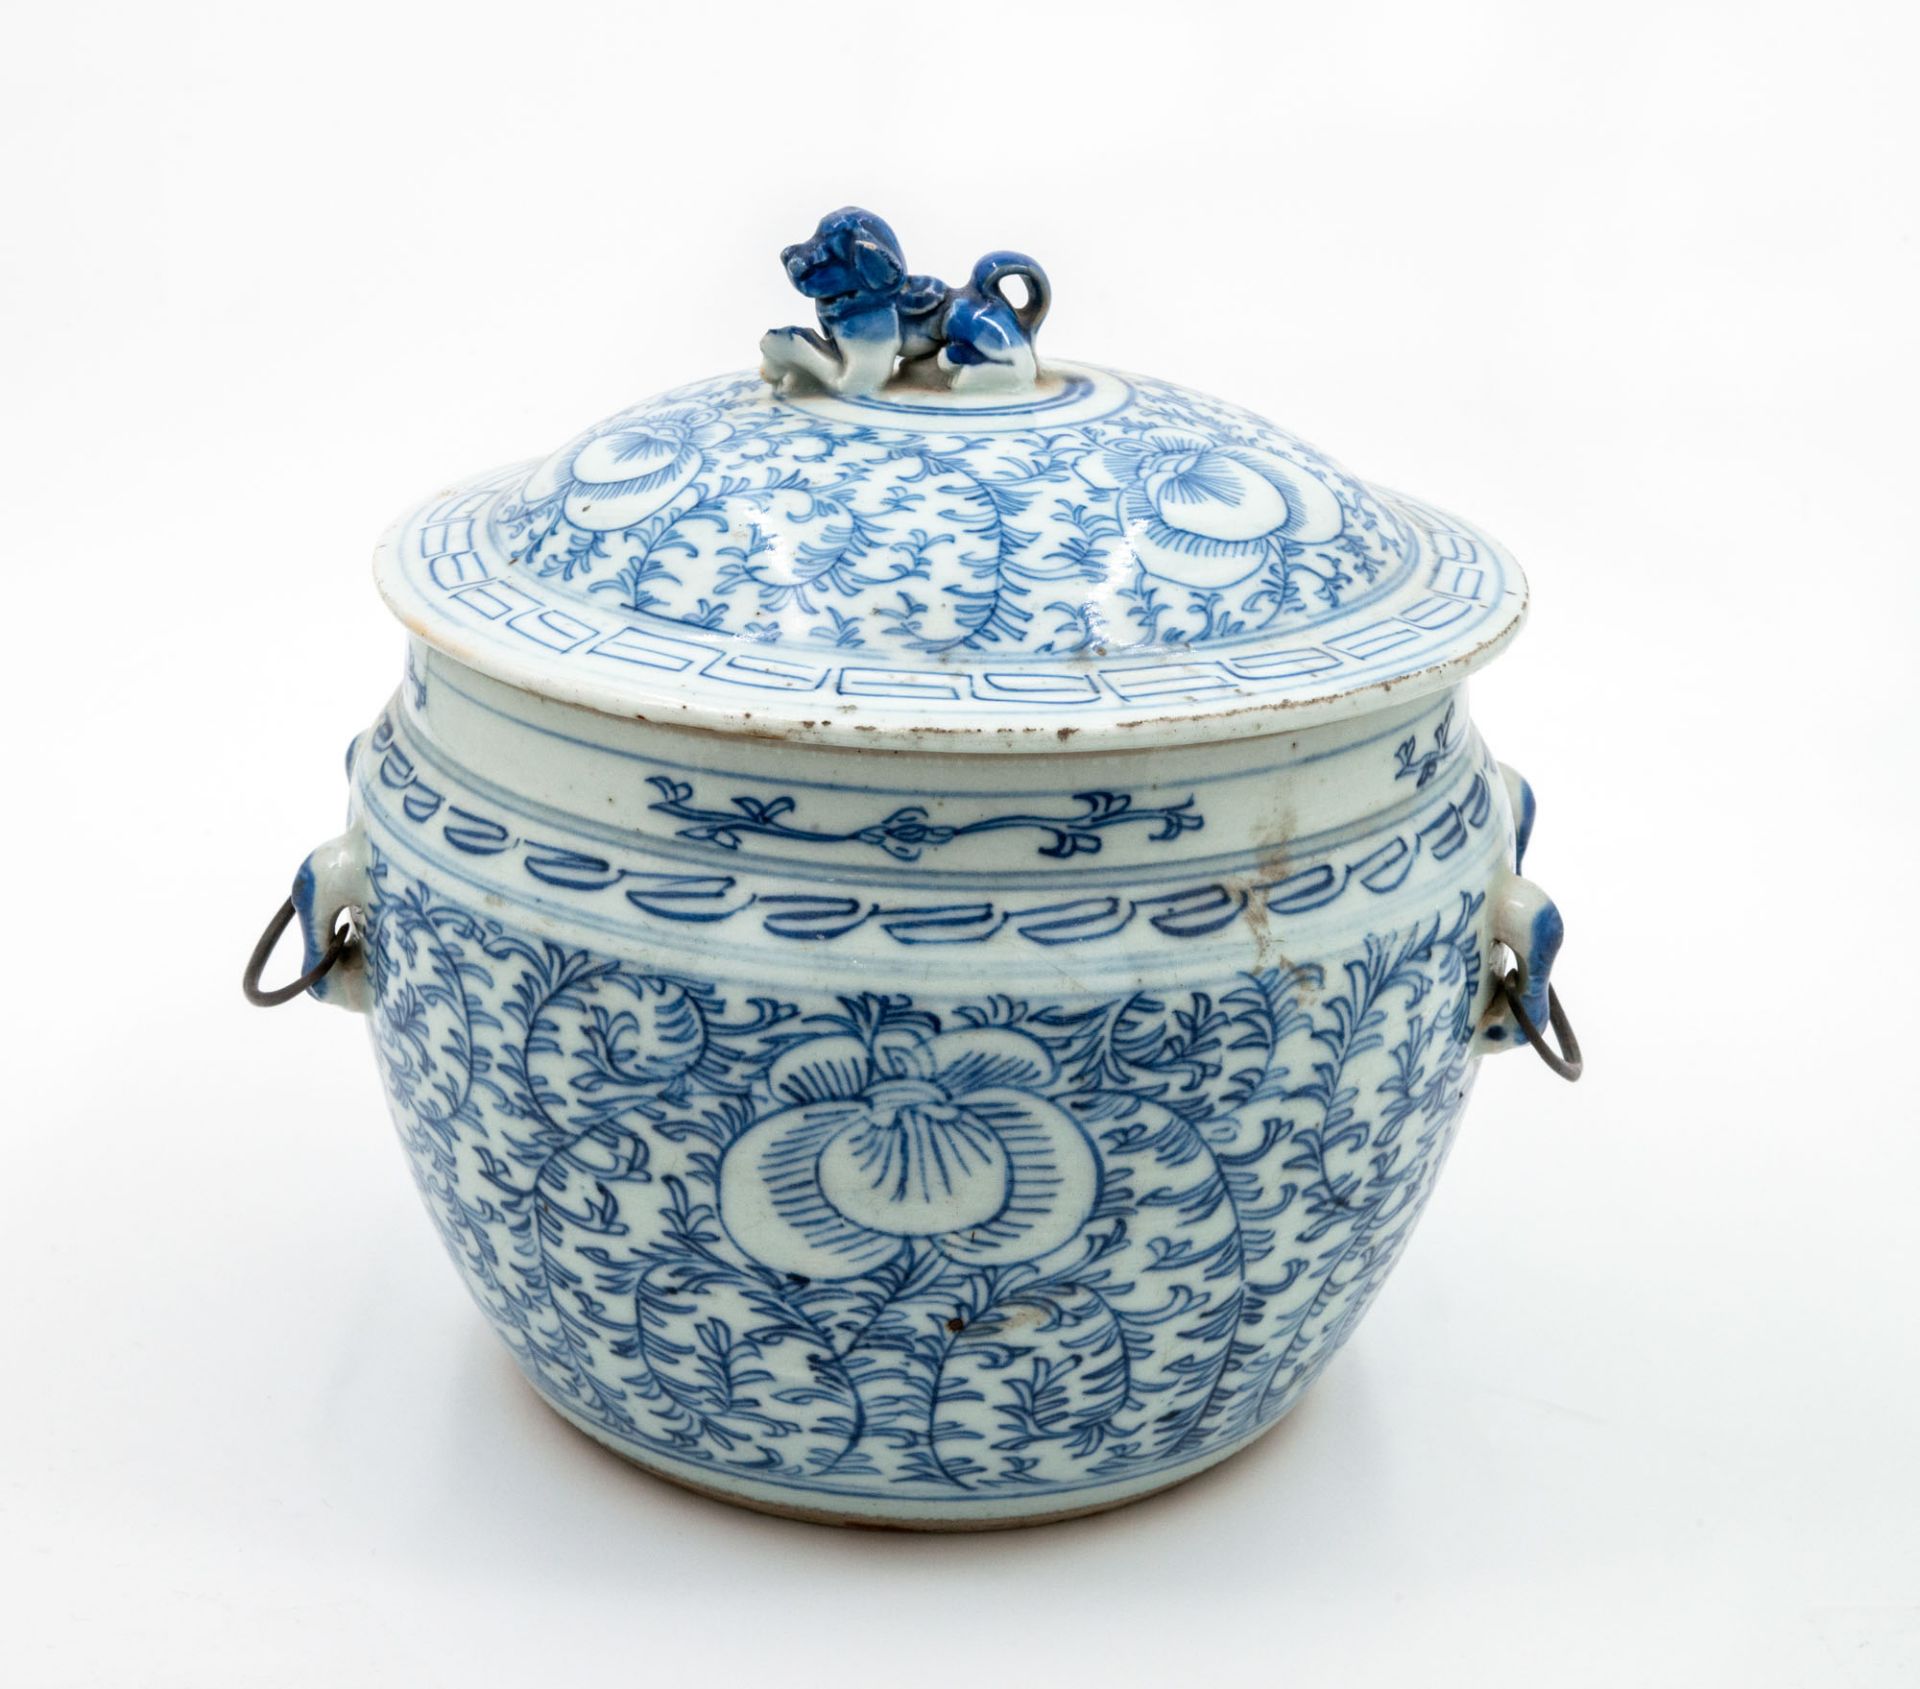 A Blue and White Porcelain Lidded Jar, China, Qing Dynasty, 19th Century